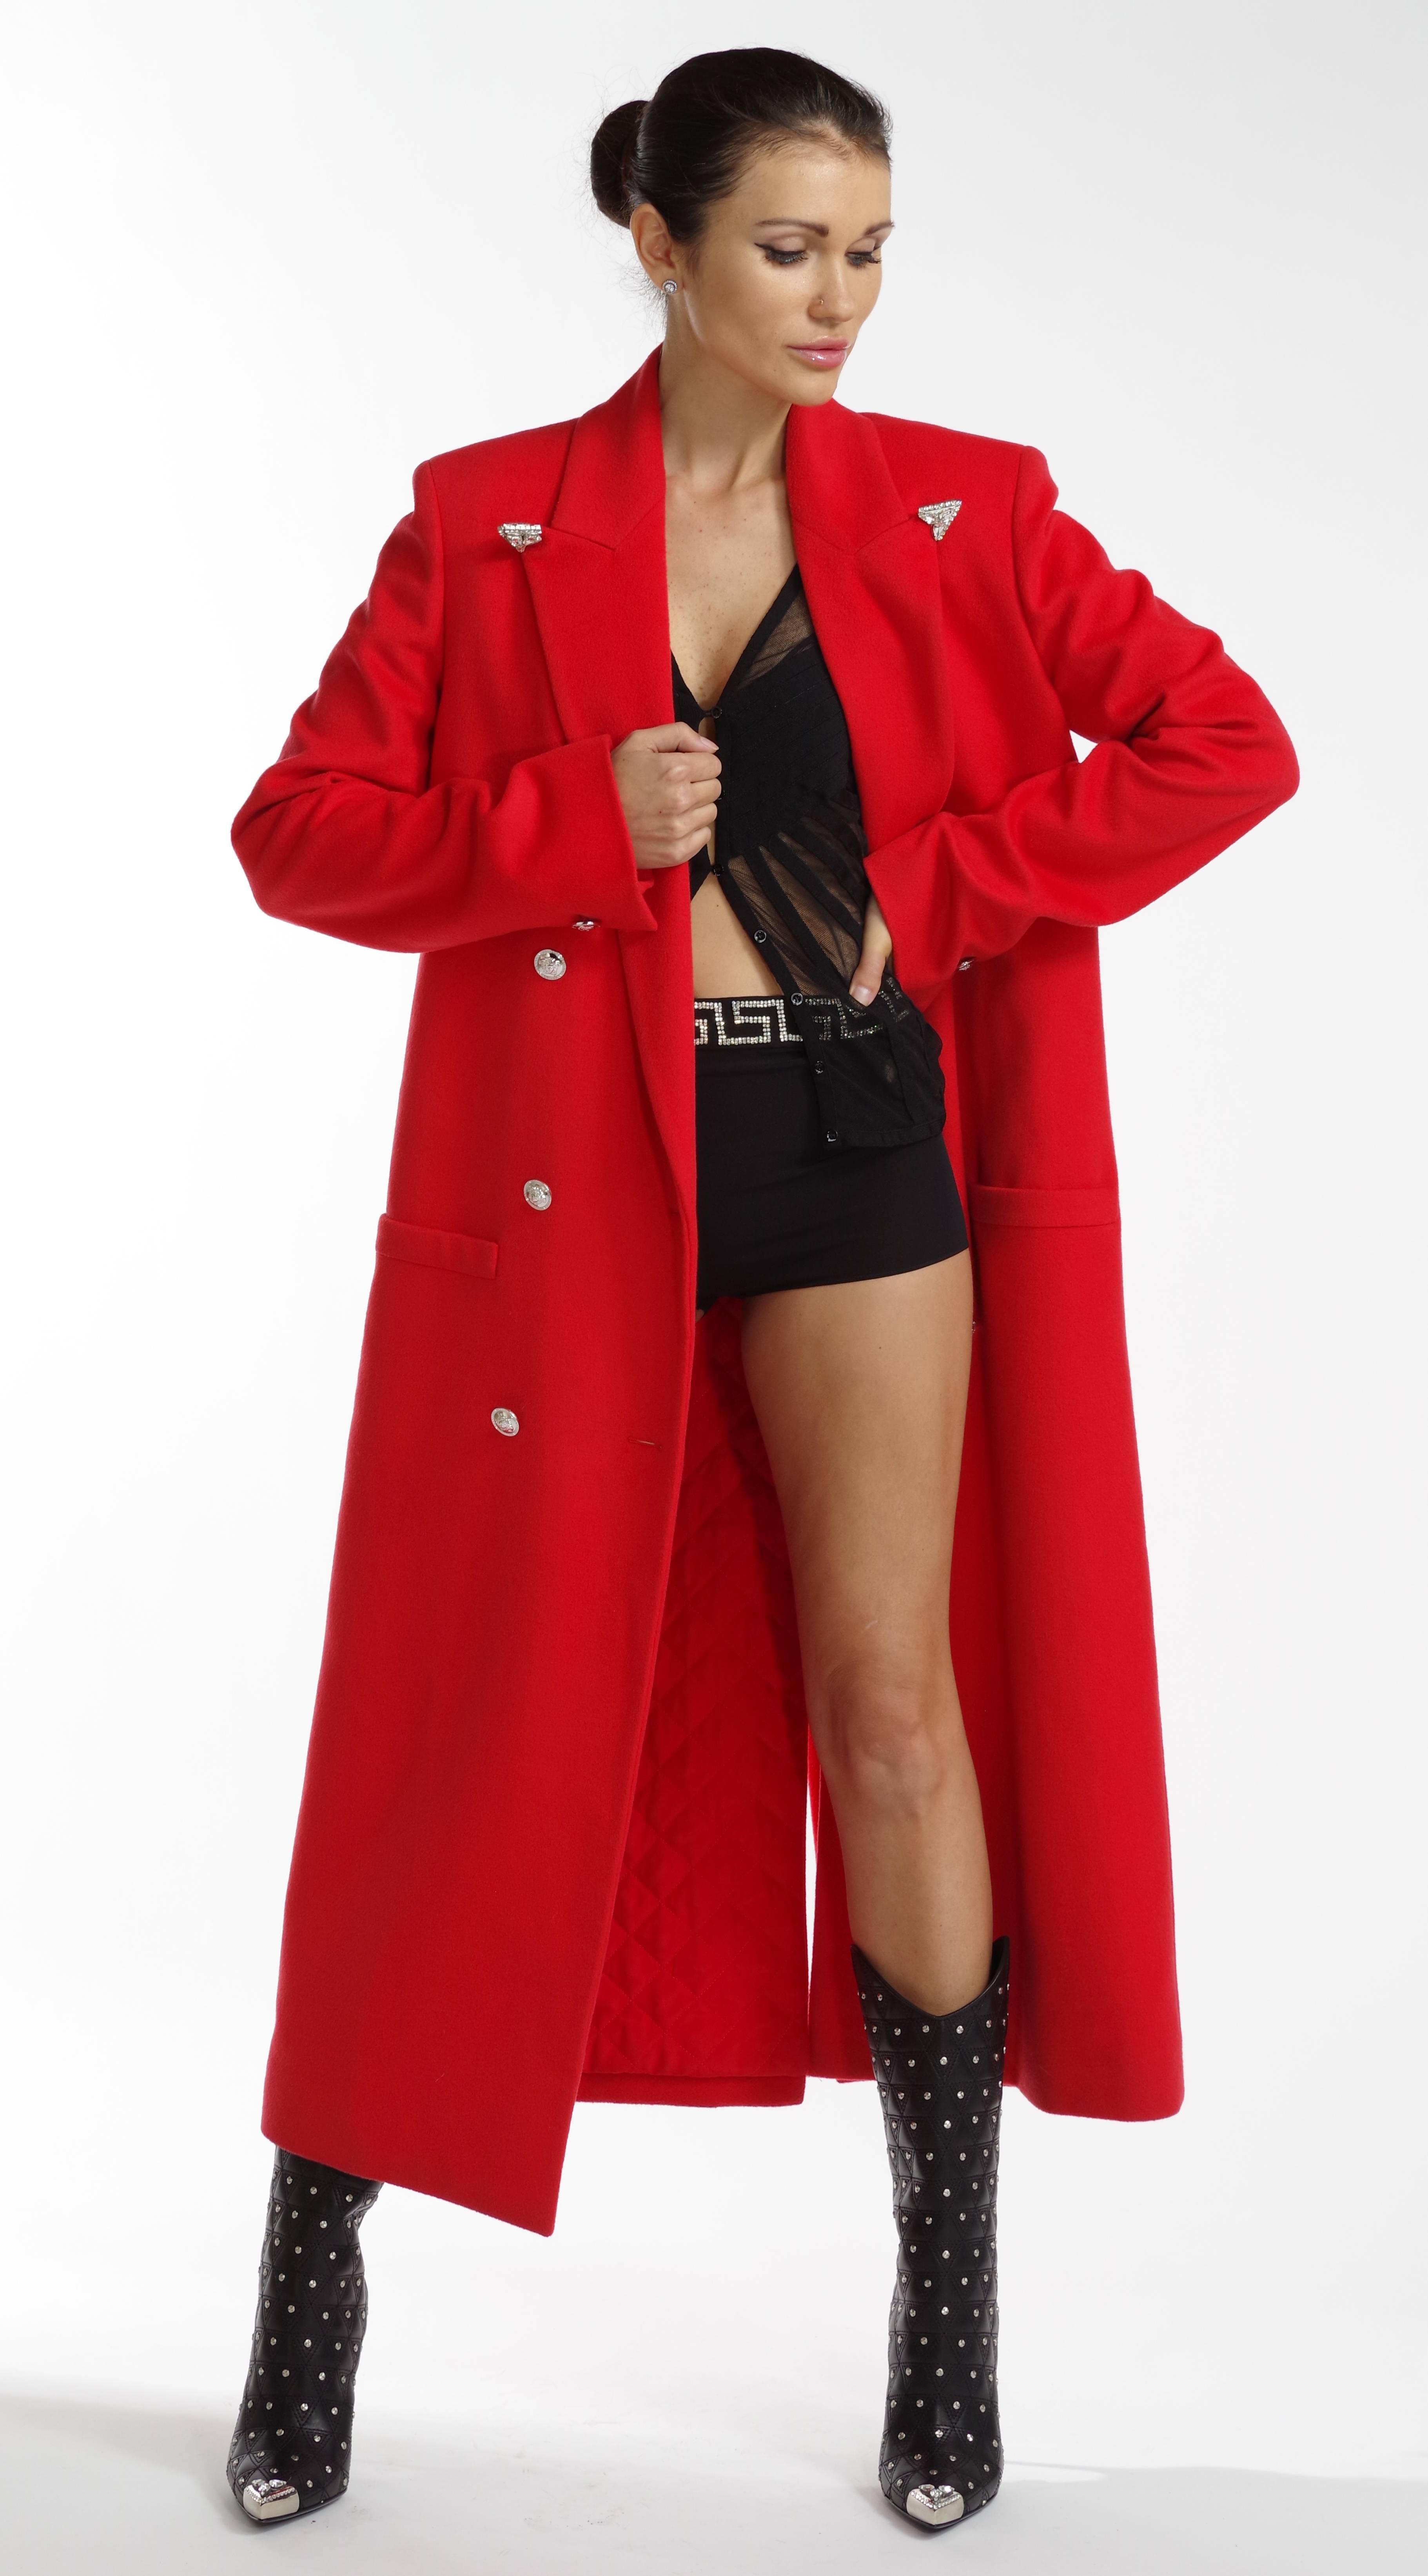 VERSACE
Long coat in red

This wool cashmere coat from Versace features a crystal-tipped notch lapel, full-length sleeves, slip front pockets, and a single vent at back.

Double breasted medusa logo button fastenings

90% wool, 10% cashmere
Quilted